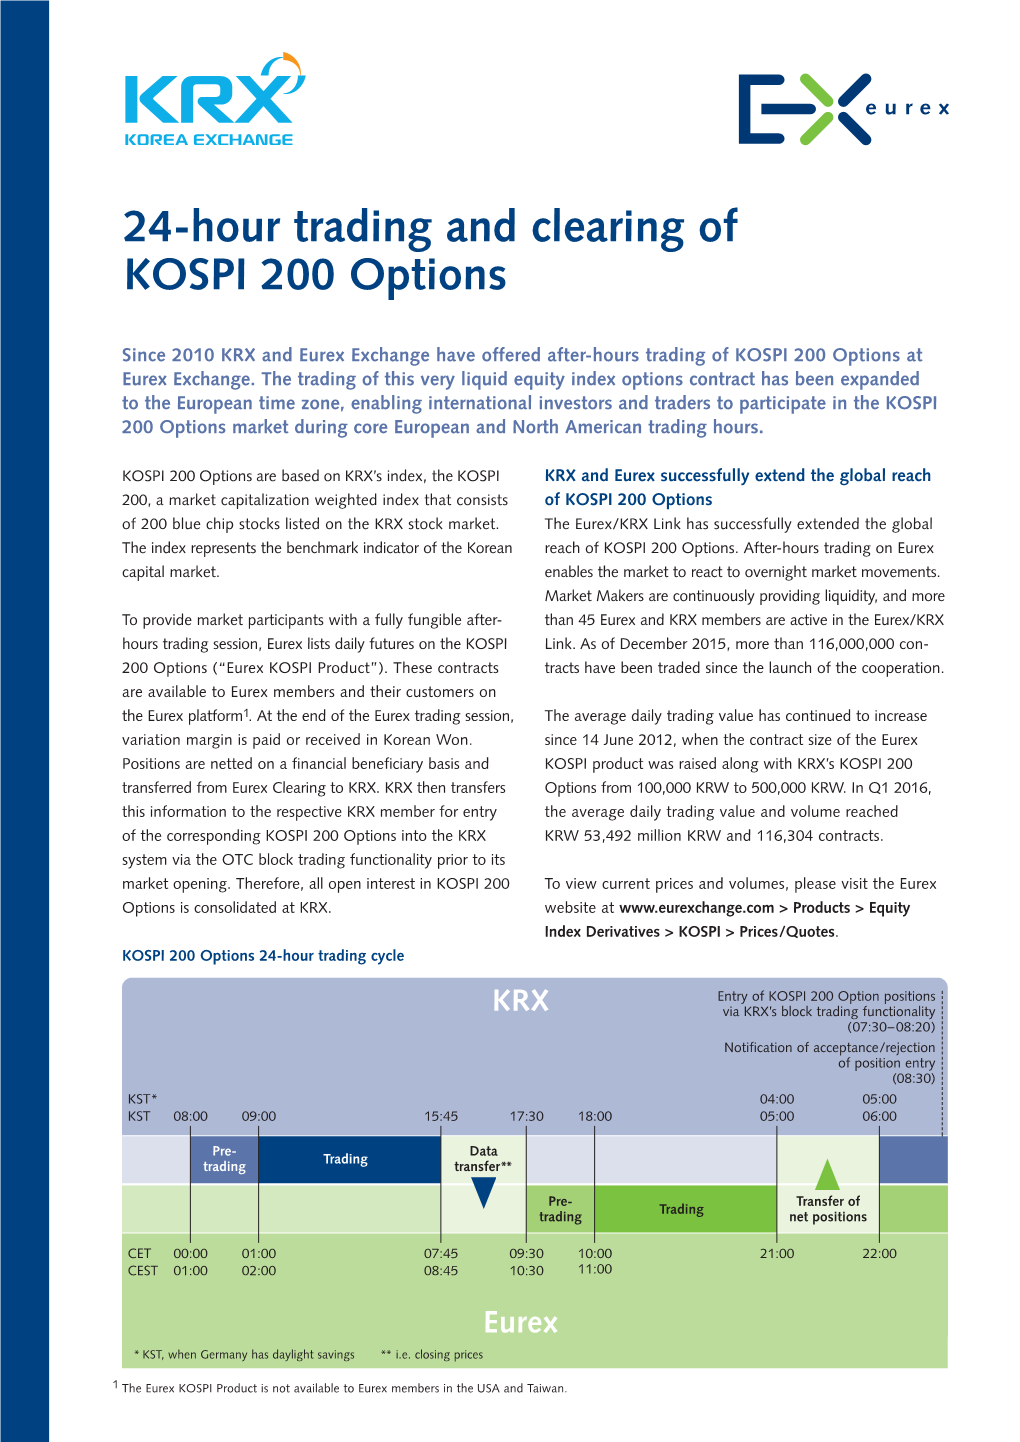 24-Hour Trading and Clearing of KOSPI 200 Options